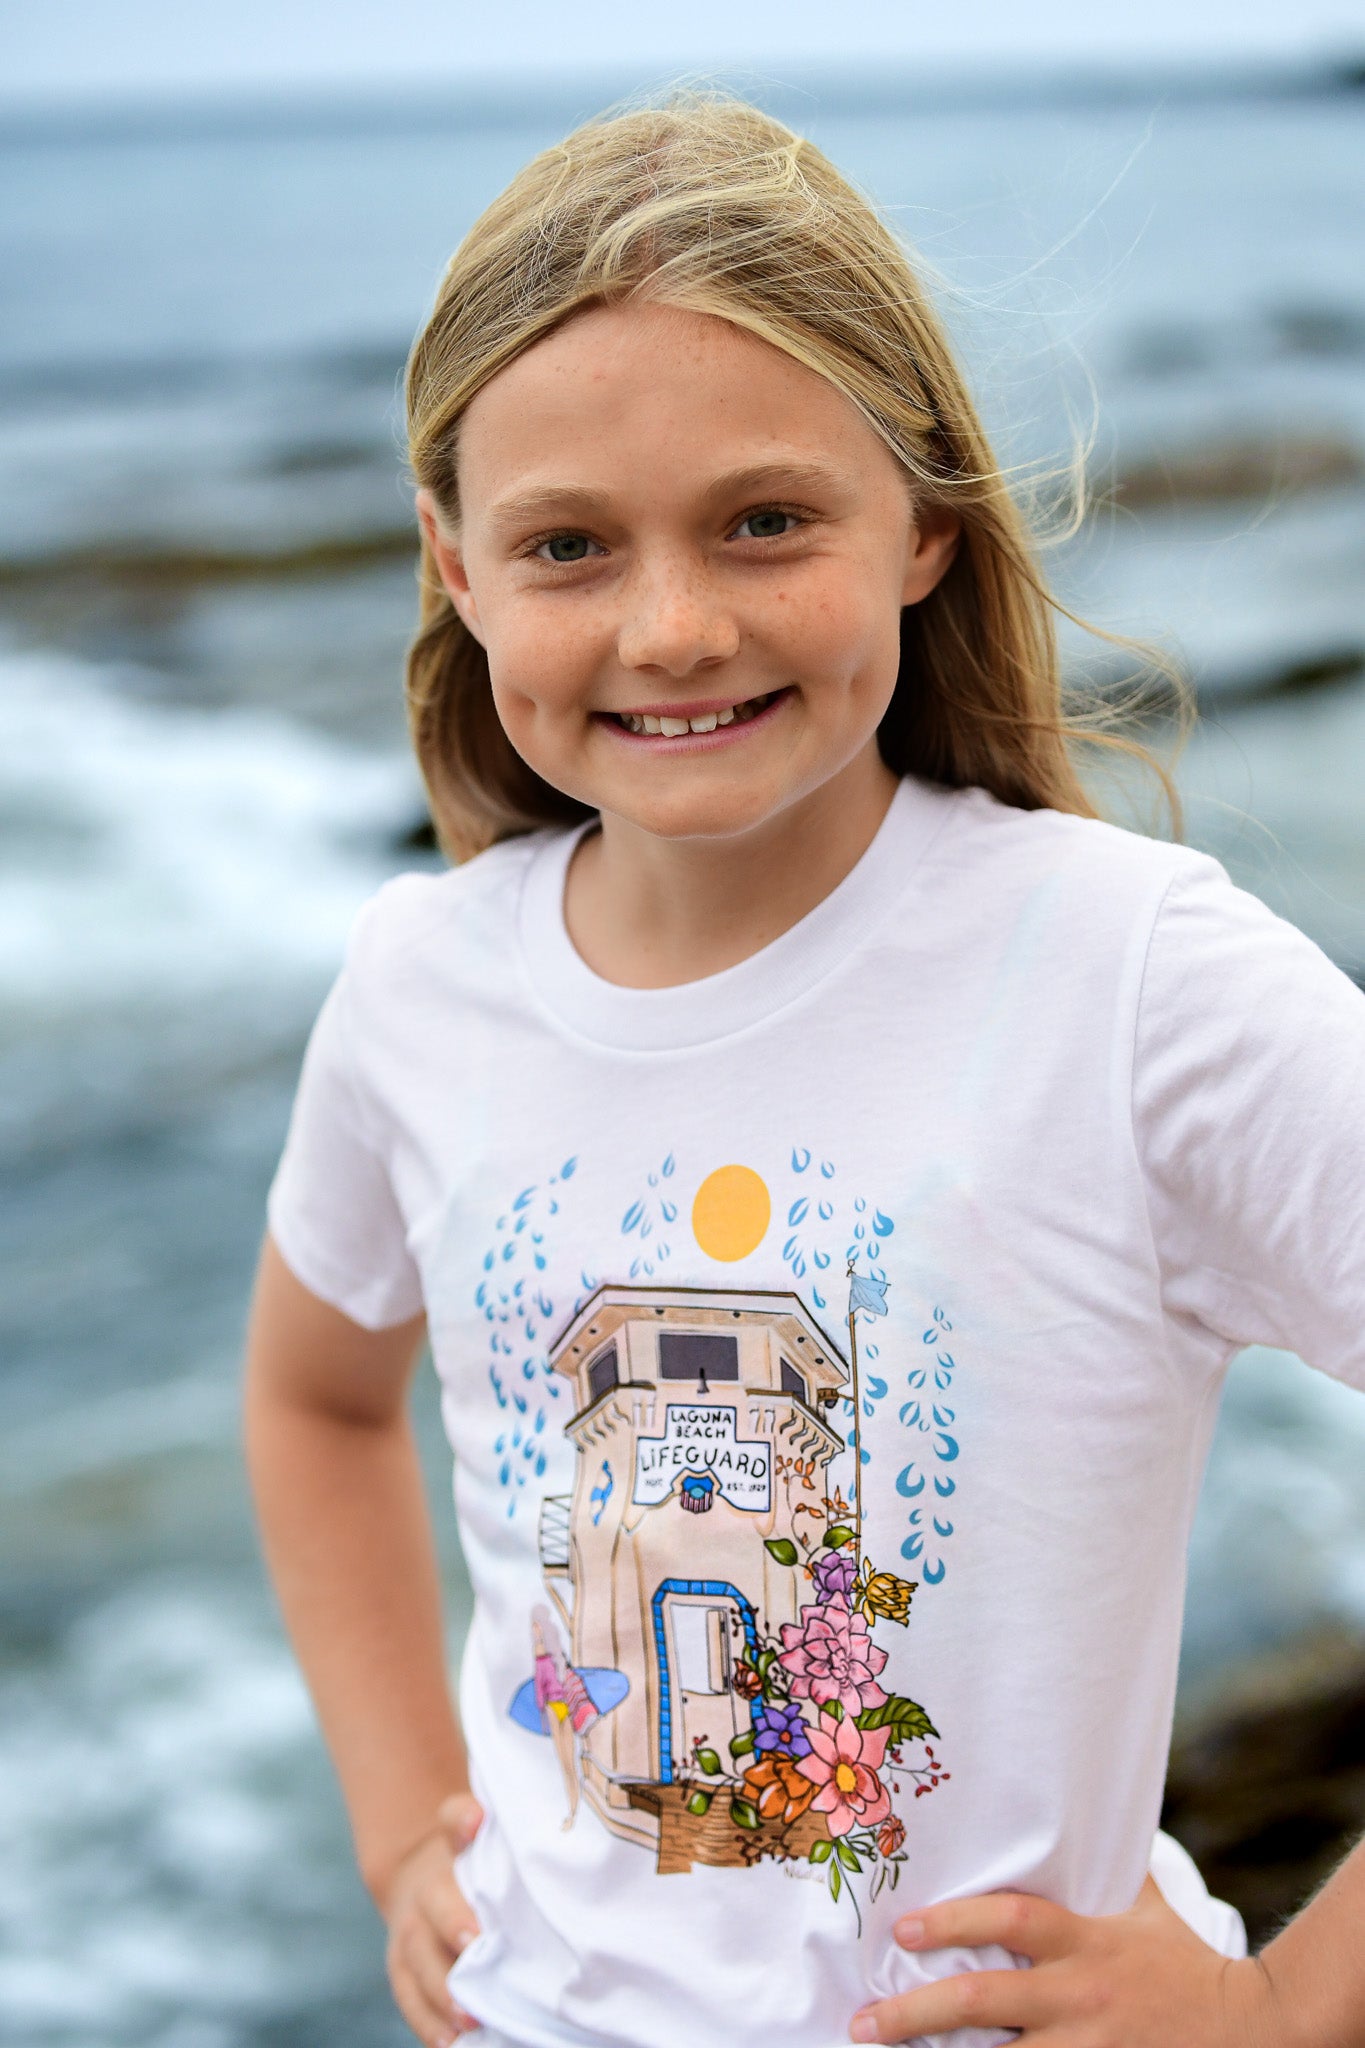 Laguna Beach Lifeguard Tower surfer girl and floral details illustrated graphic t-shirt for girls. 